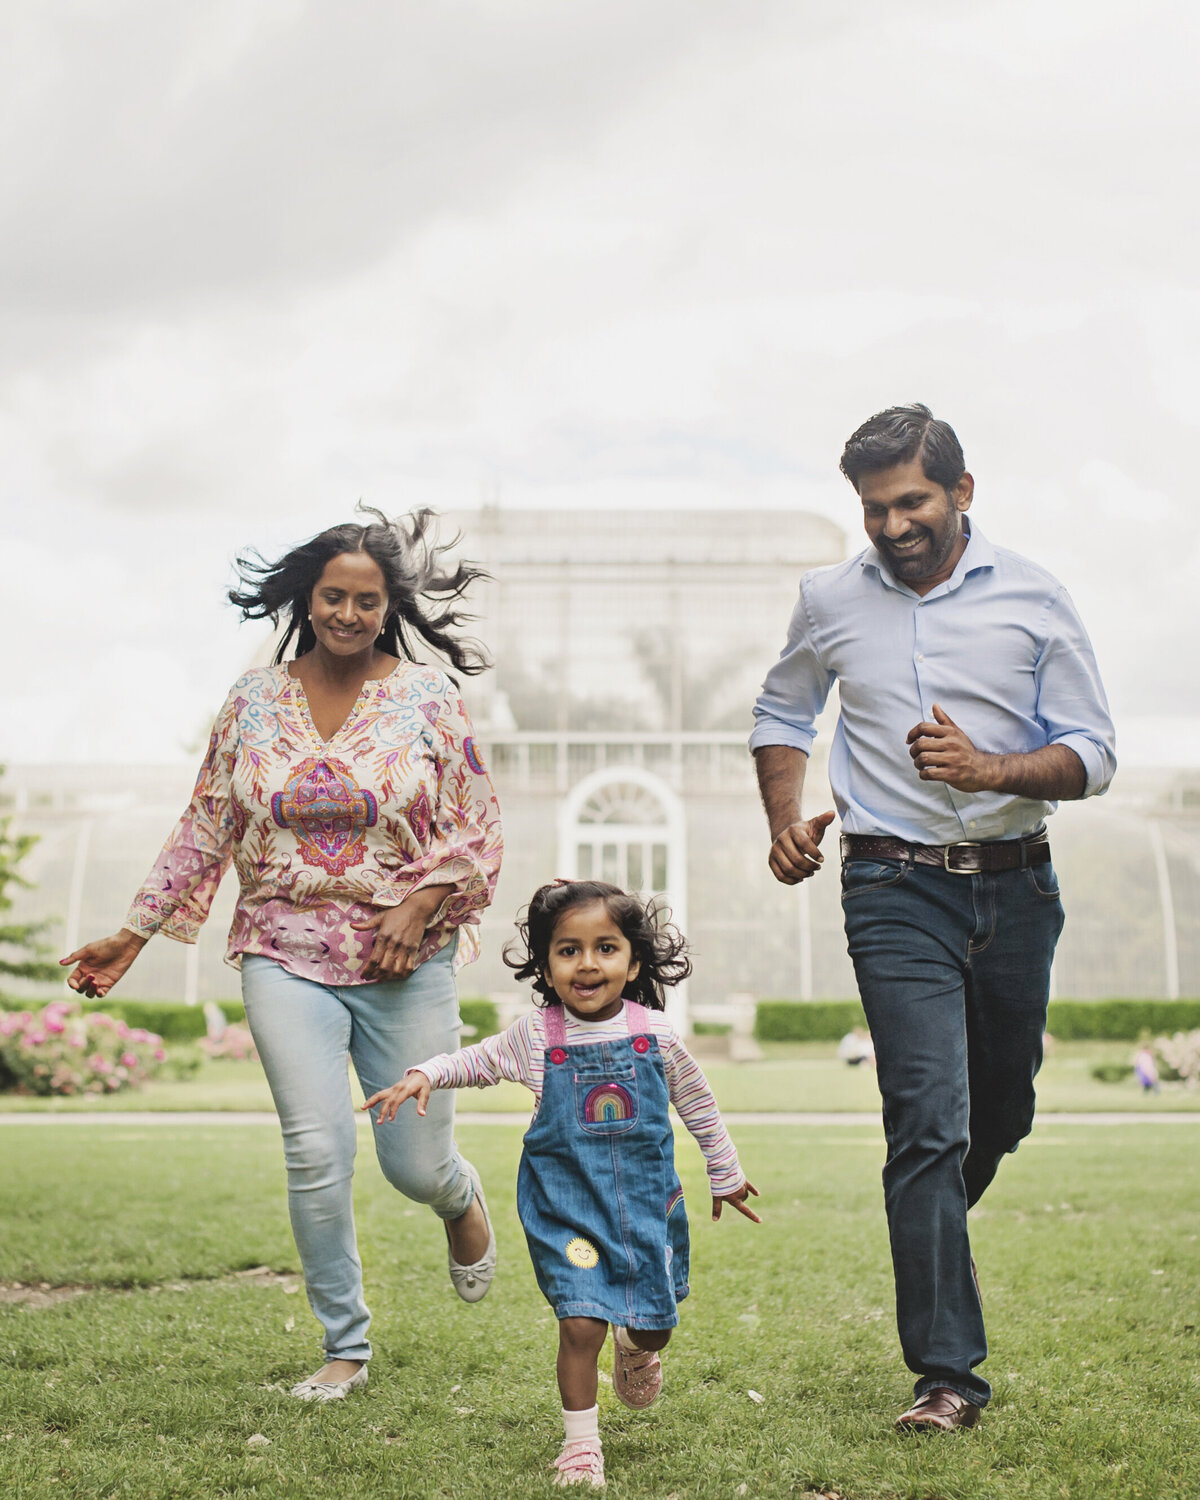 A mother and father run after their smiling little girl at Kew Gardens in Surrey